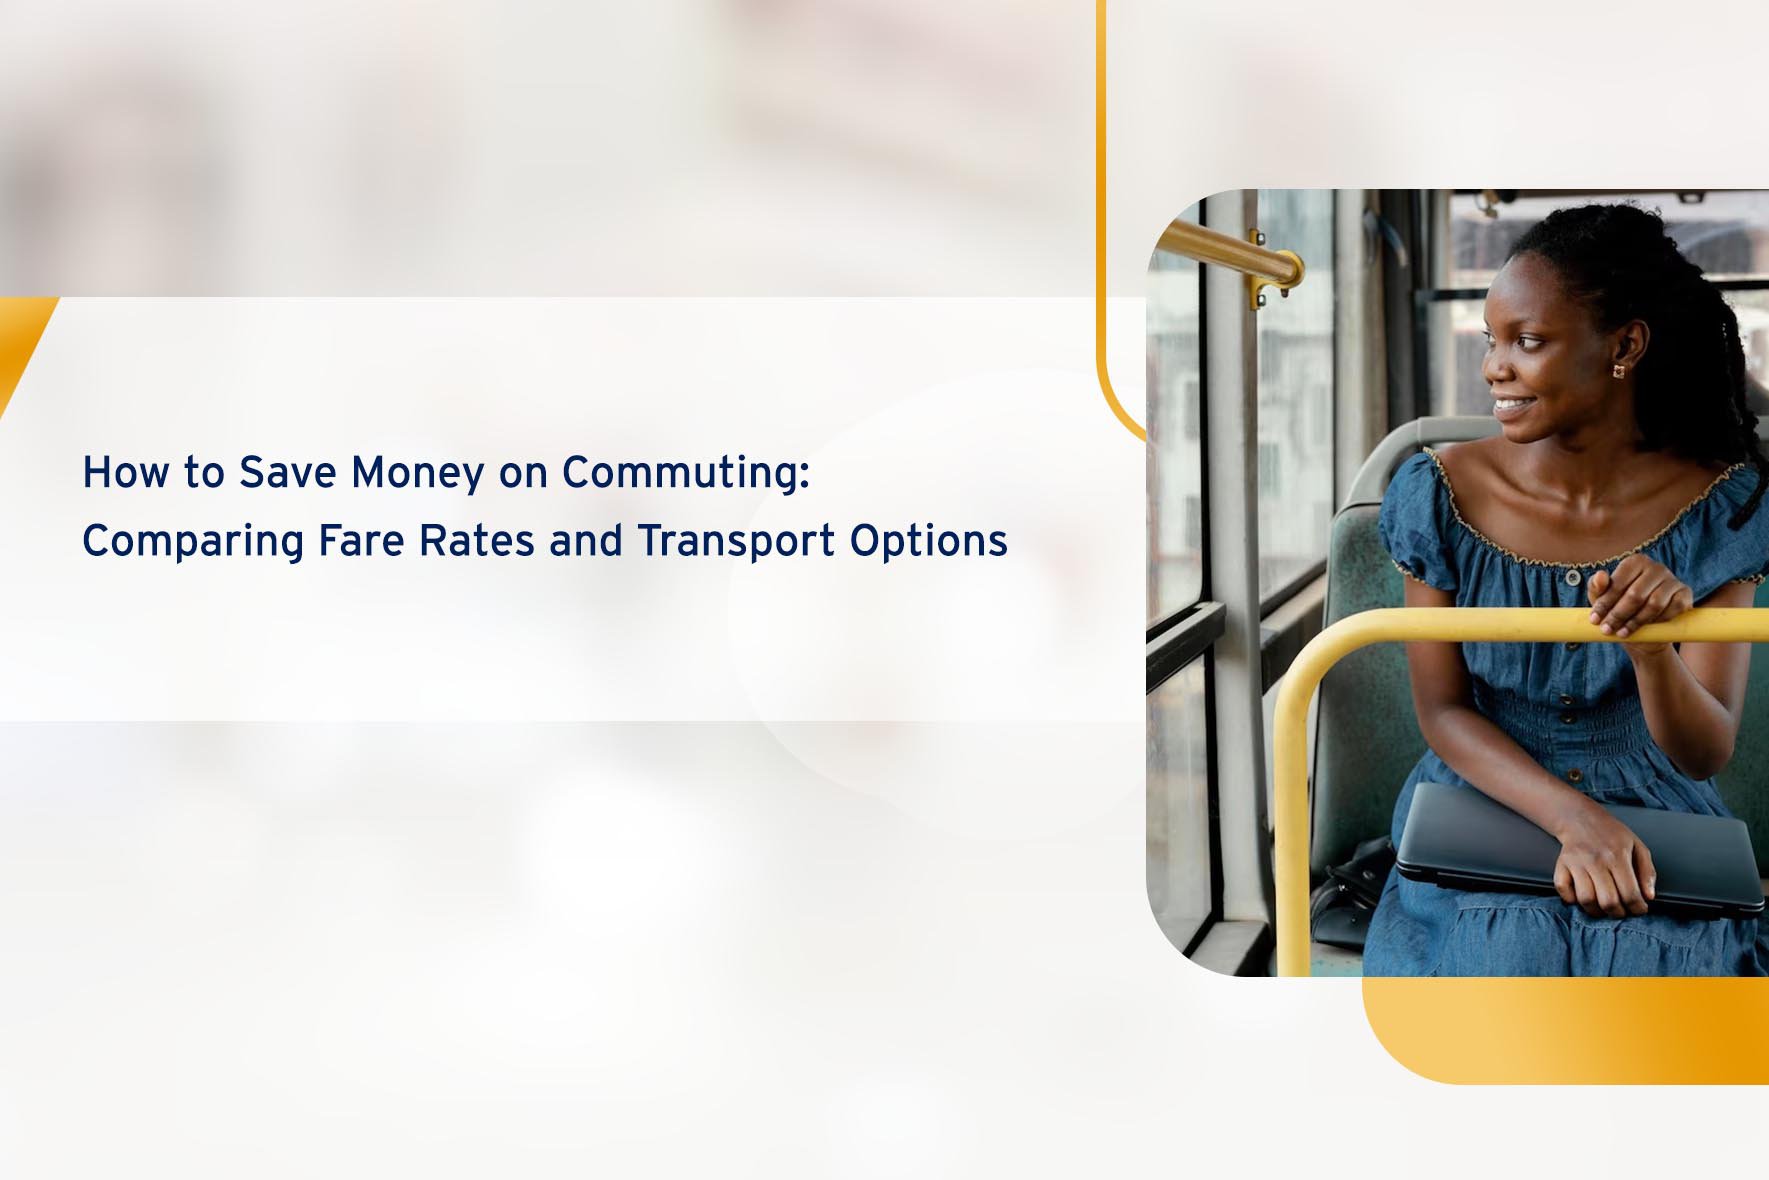 How to Save Money on Commuting: Comparing fare rates and transport options